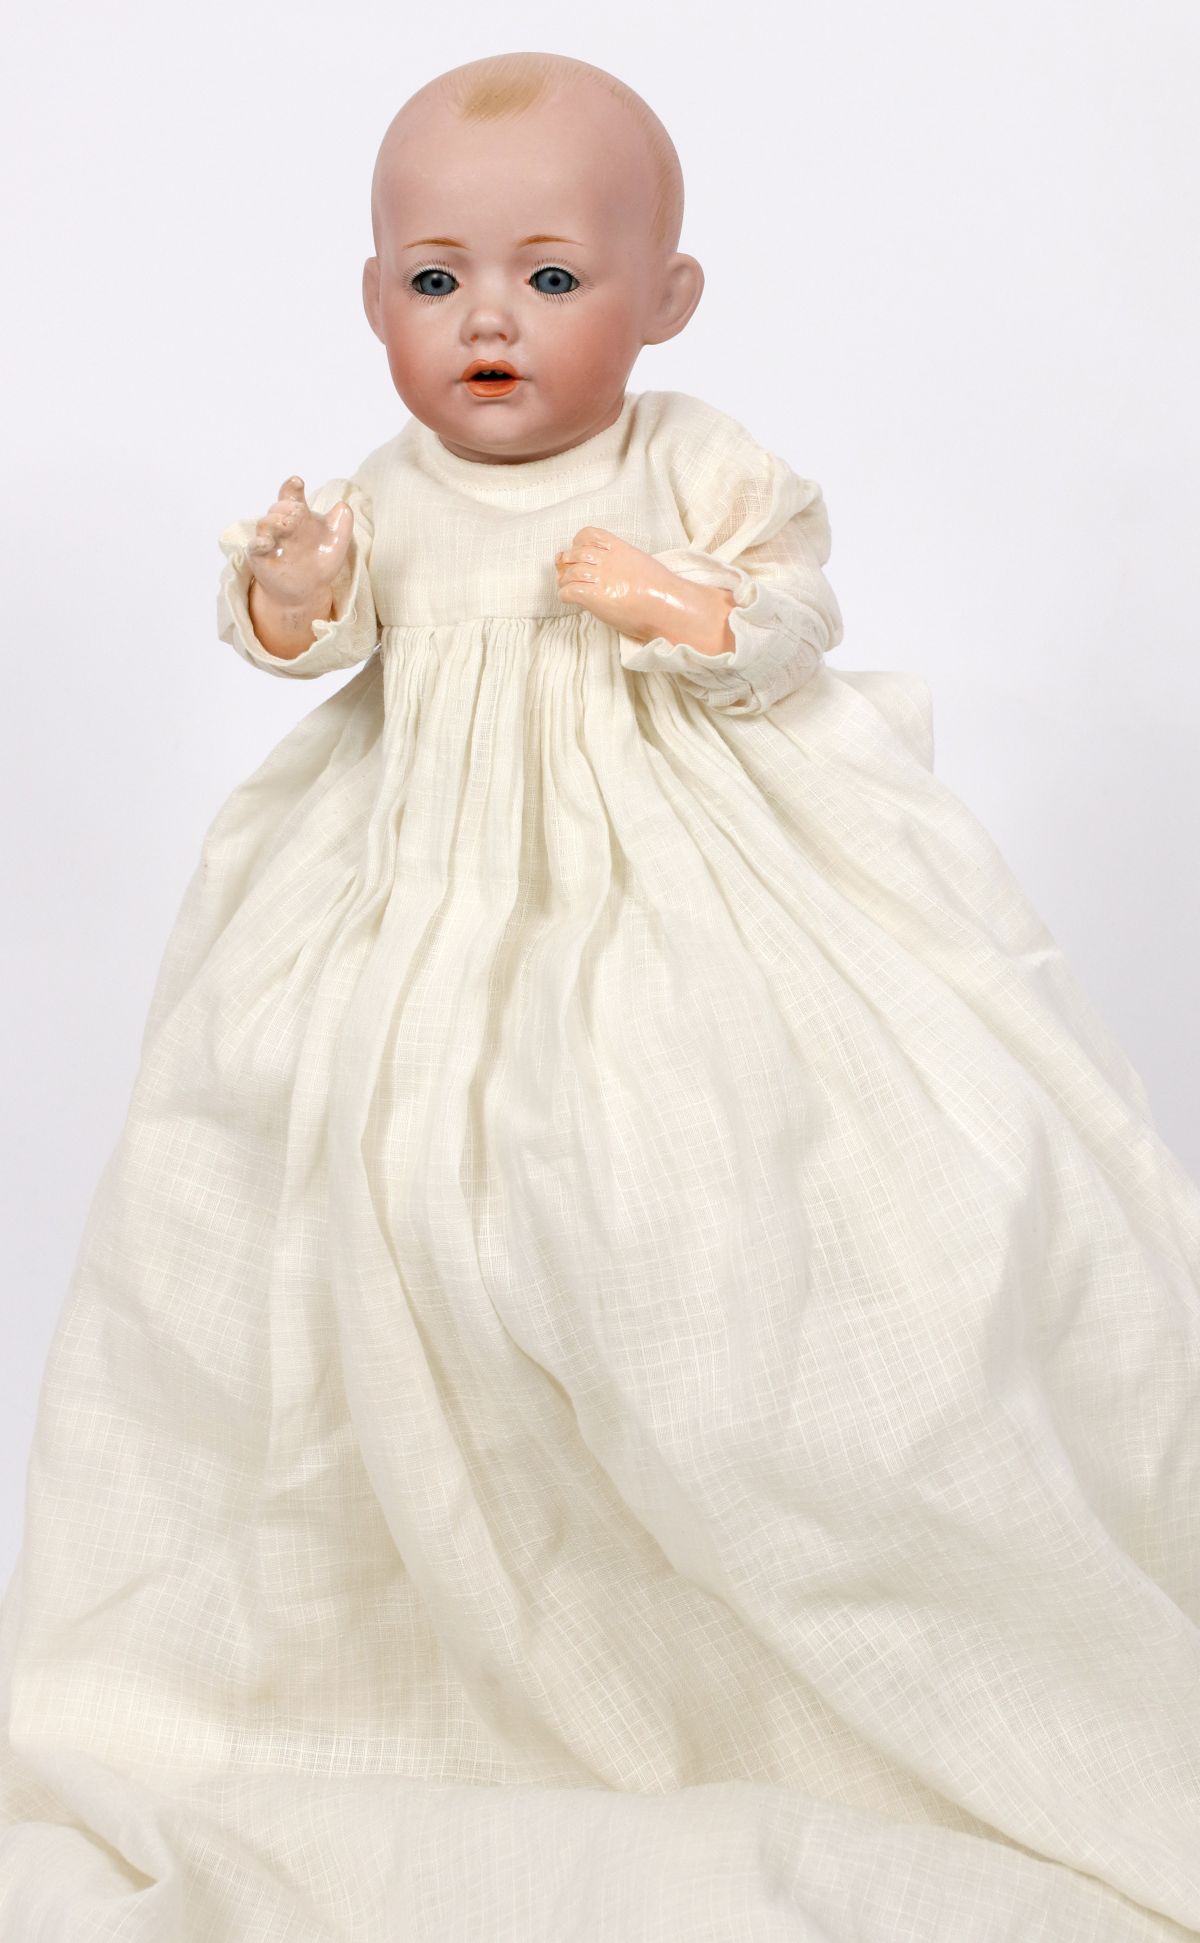 AN ANTIQUE HILDA BISQUE BABY CHARACTER BY KESTNER